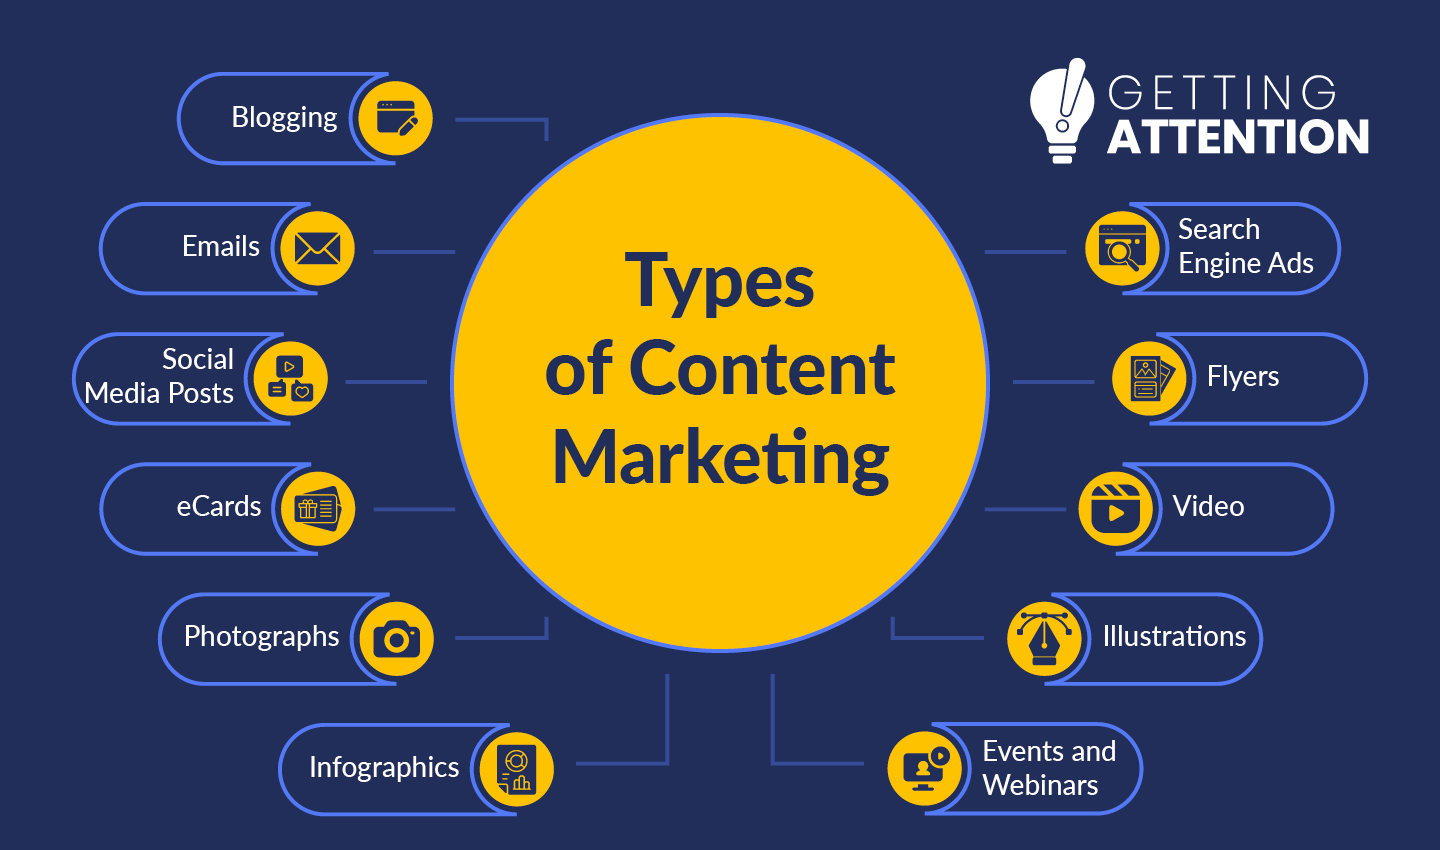 A summary of the various types of content marketing for nonprofits, explained in the text below